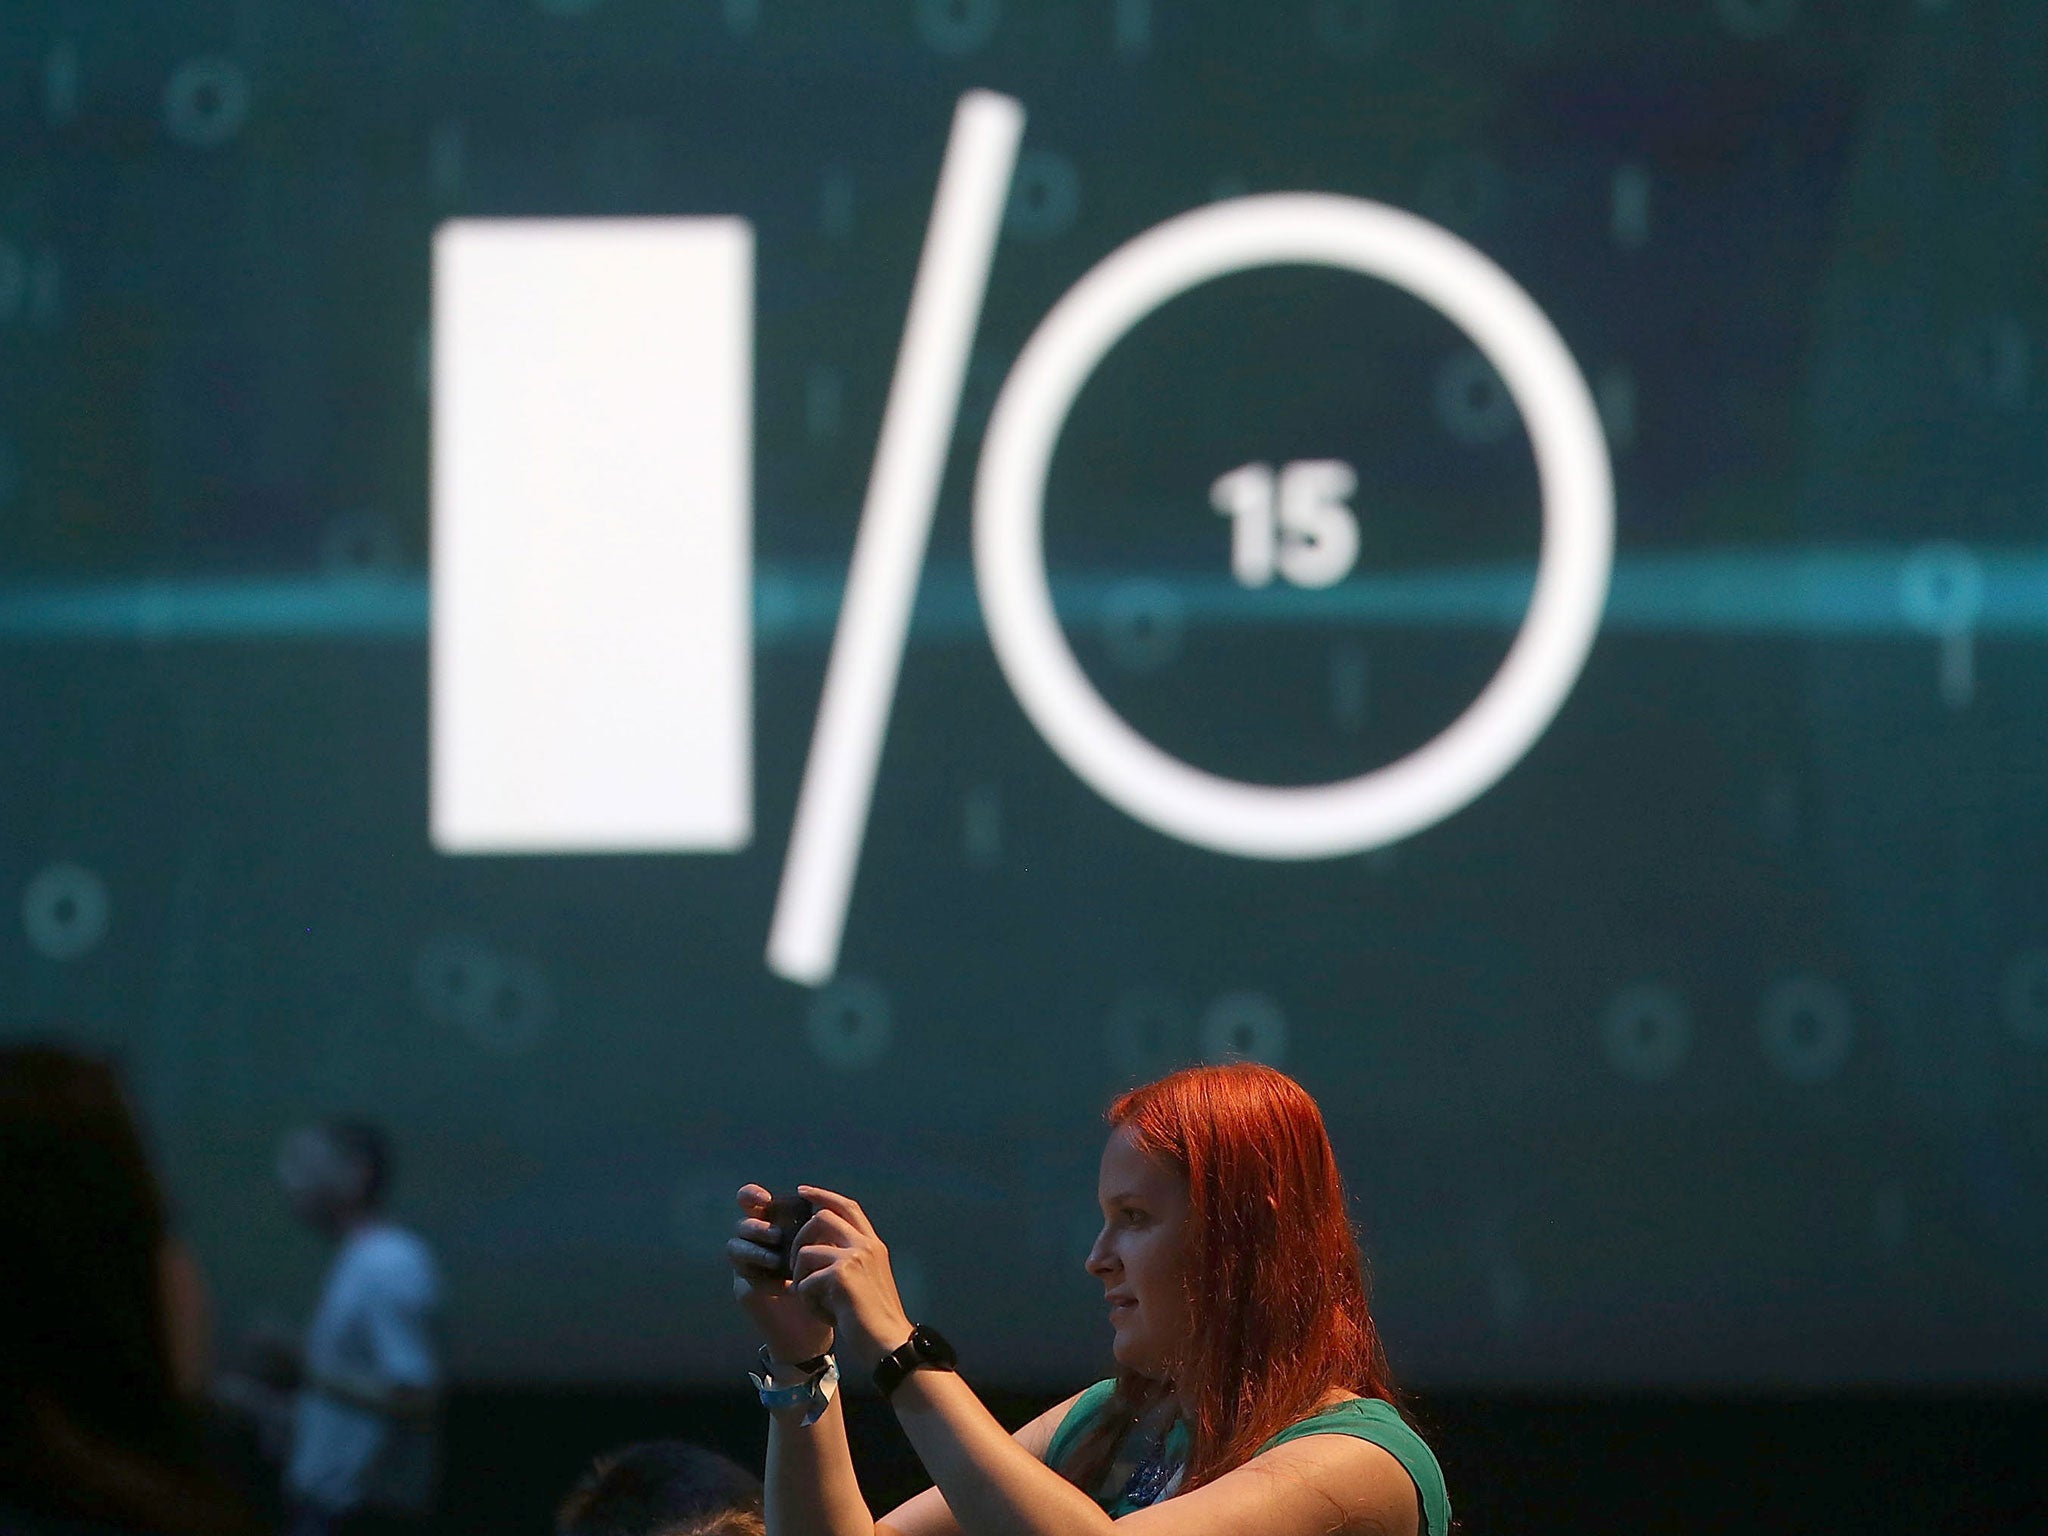 Attendees take photographs before the start of the opening keynote during the 2015 Google I/O conference